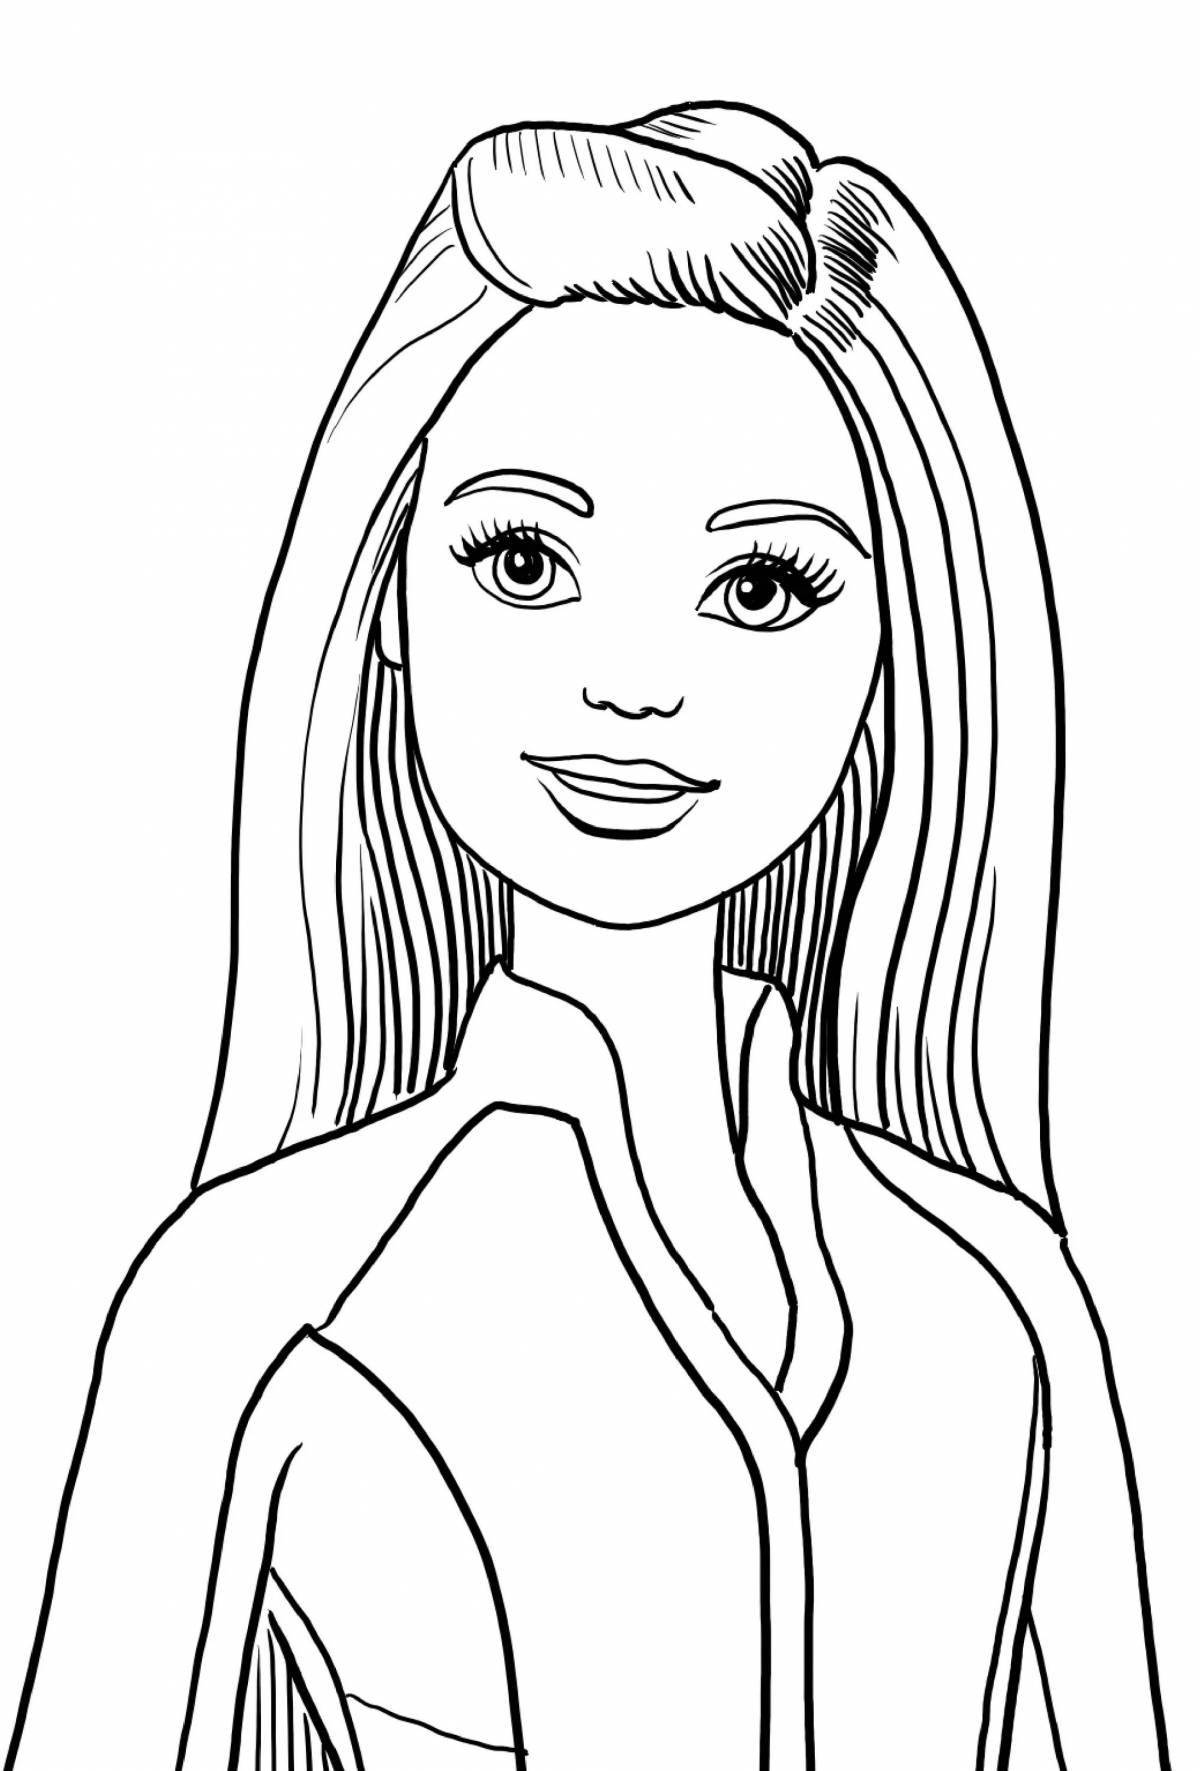 Glowing make-up doll coloring page